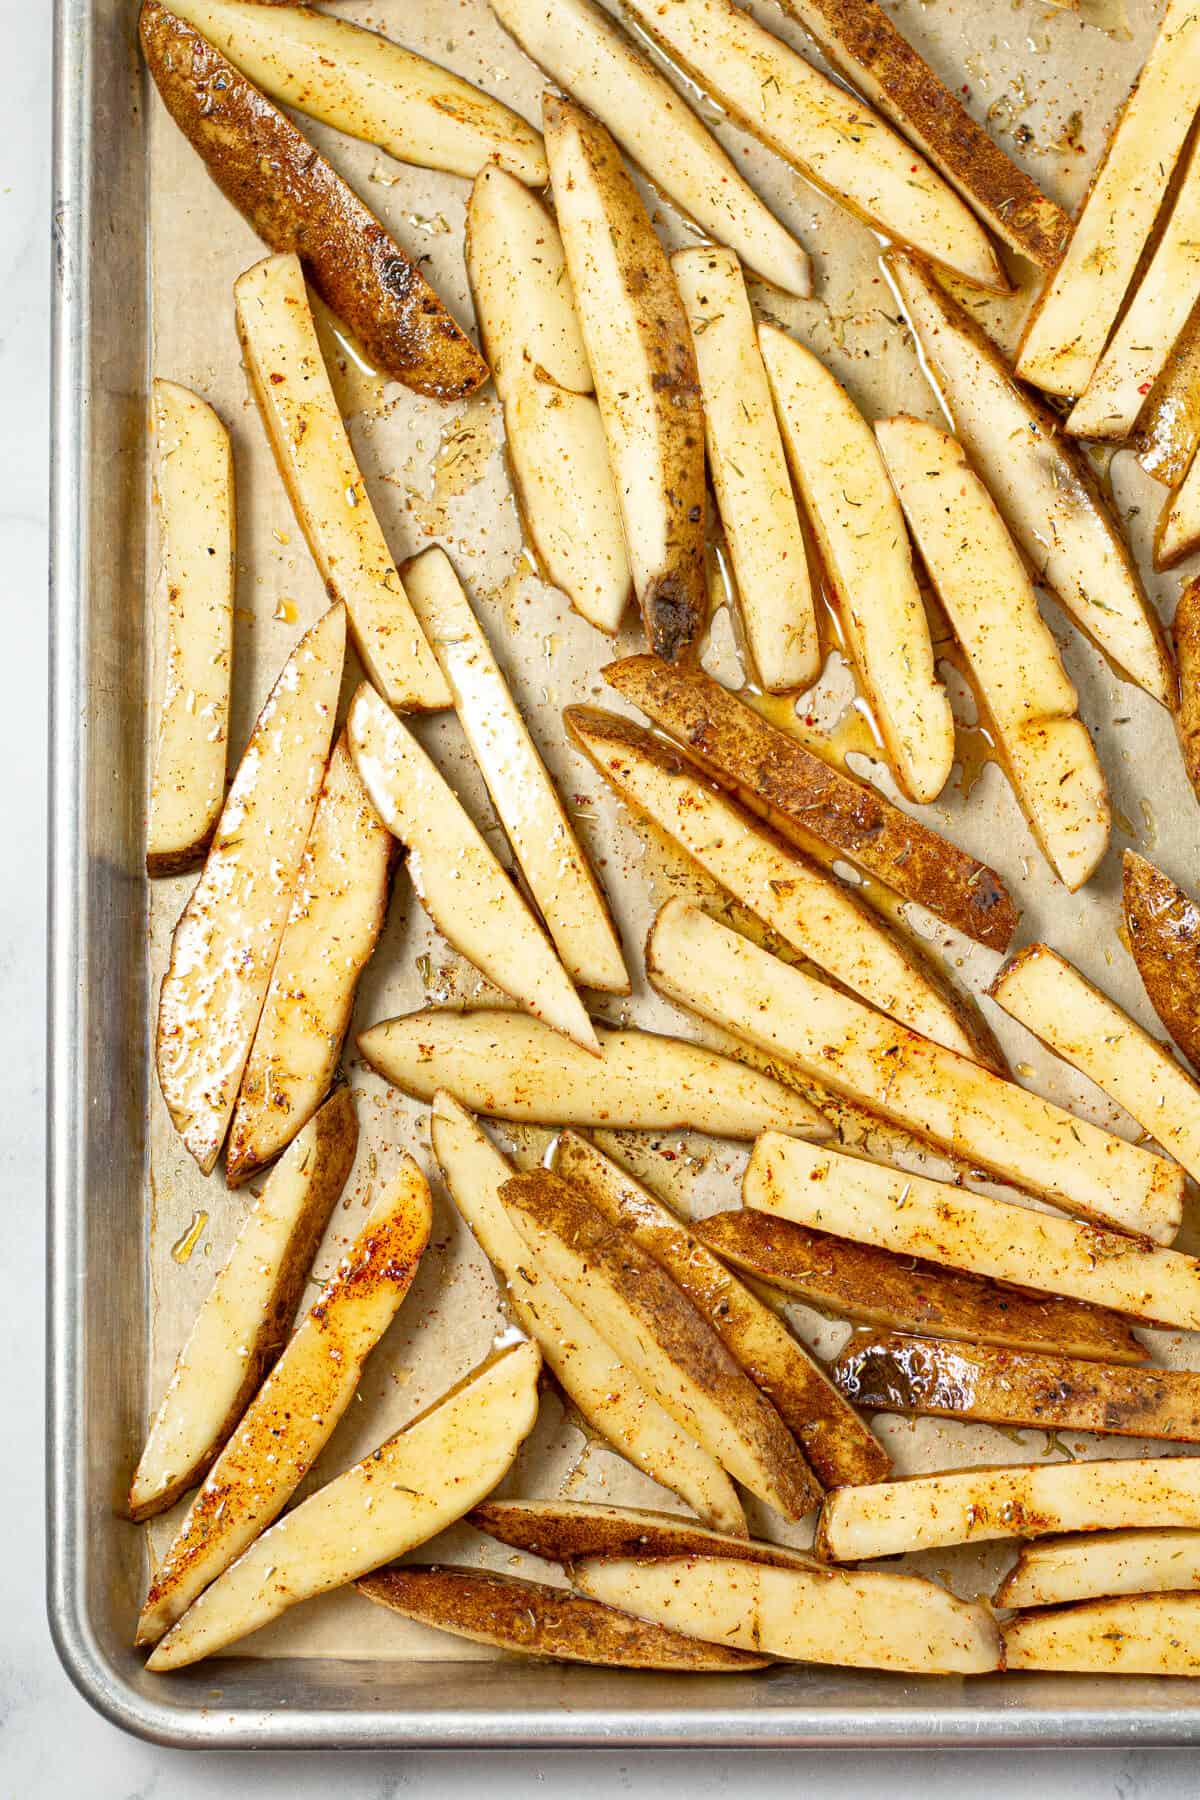 Parchment lined baking sheet with fresh cut French fries ready for the oven 